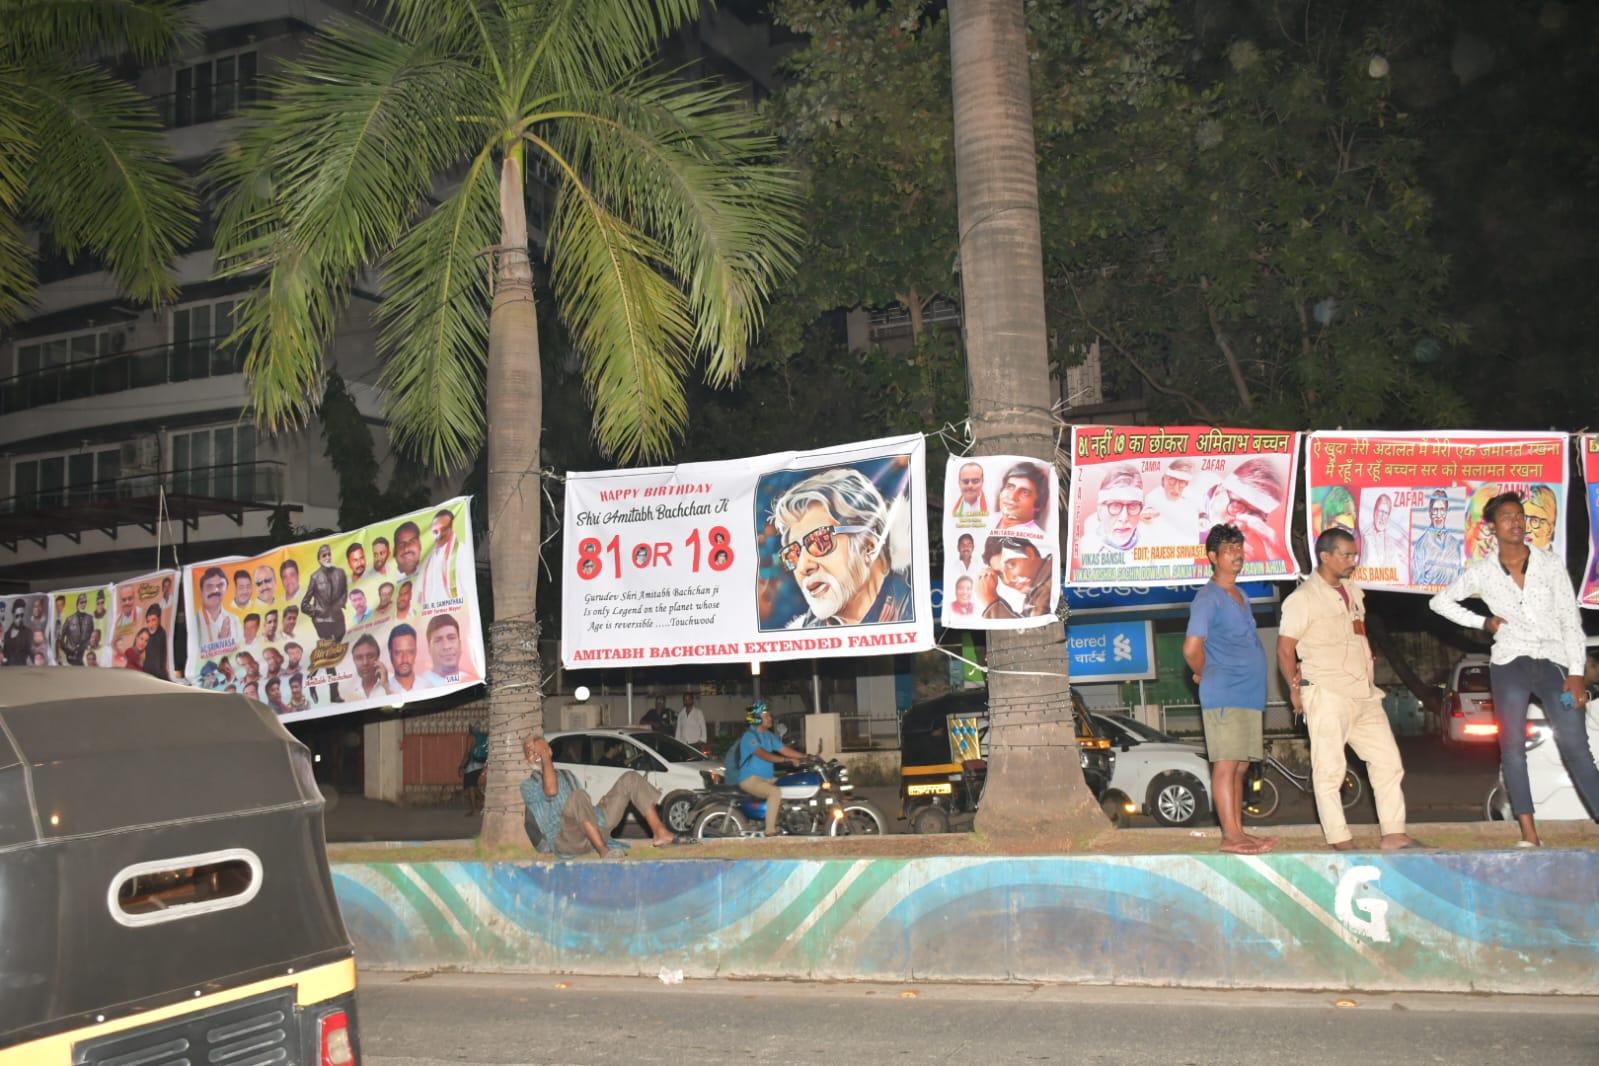 In honor of Amitabh Bachchan, Juhu Tara Road was decked out with posters with Amitabh's face greeting you at every corner 